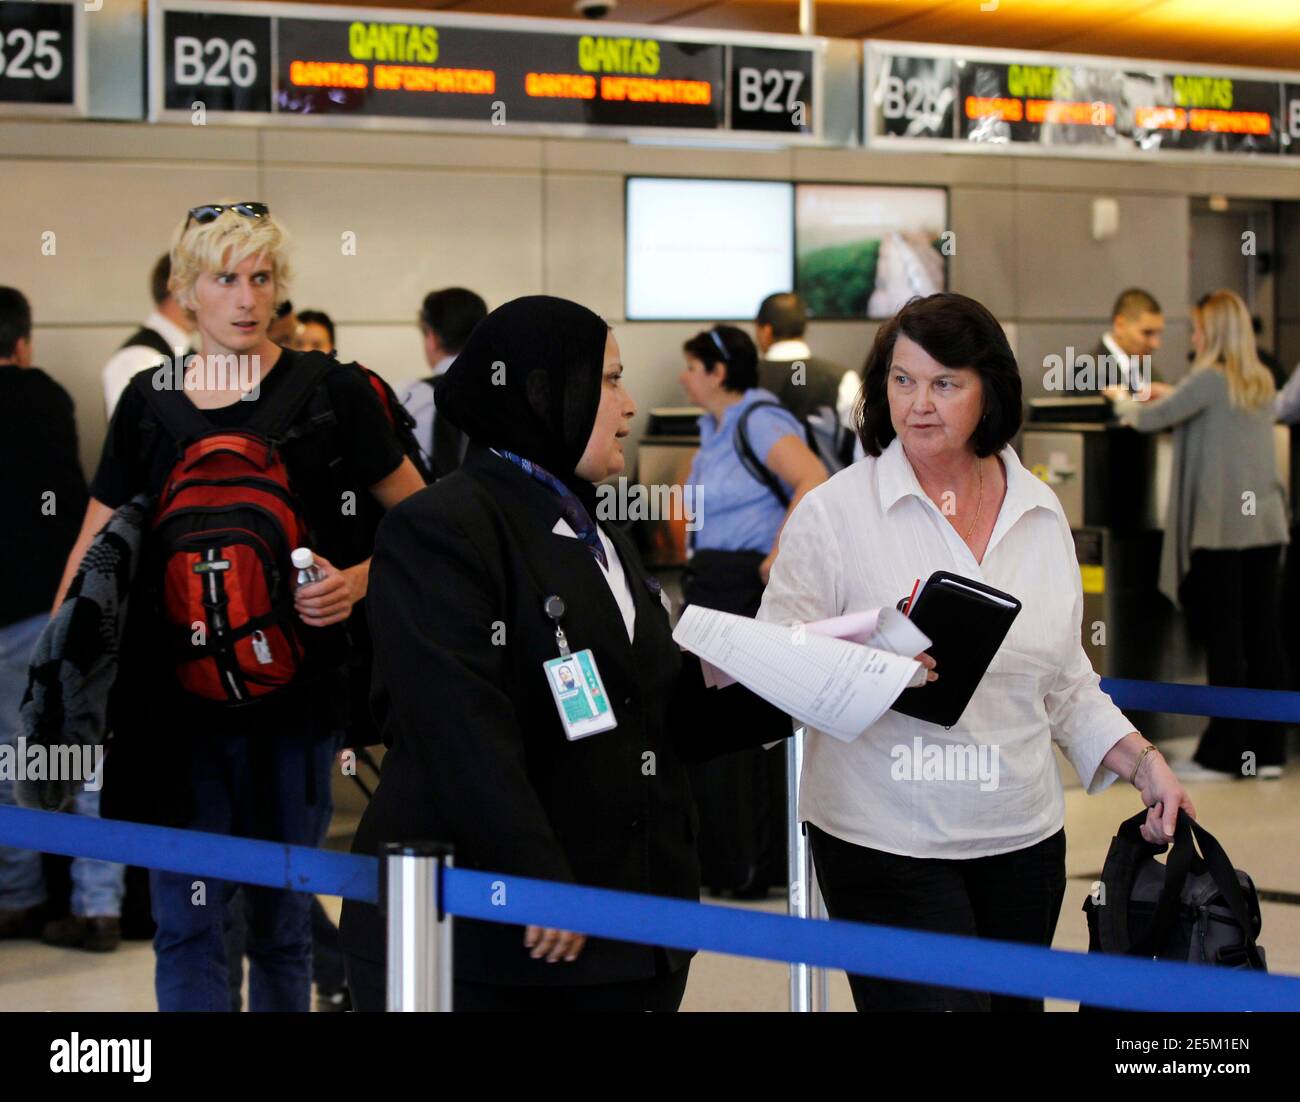 A Qantas Airways employee walks ticket holders over to the Singapore Airlines ticket counter, as she works to rebook them on a different flight, at Los Angeles International Airport (LAX) October 29, 2011. Tens of thousands of stranded Qantas Airways passengers are pinning their hopes on a government-appointed tribunal on Sunday ordering an end to the industrial action that grounded the Australian national carrier's entire fleet.  REUTERS/Danny Moloshok (UNITED STATES - Tags: TRANSPORT BUSINESS EMPLOYMENT) Stock Photo